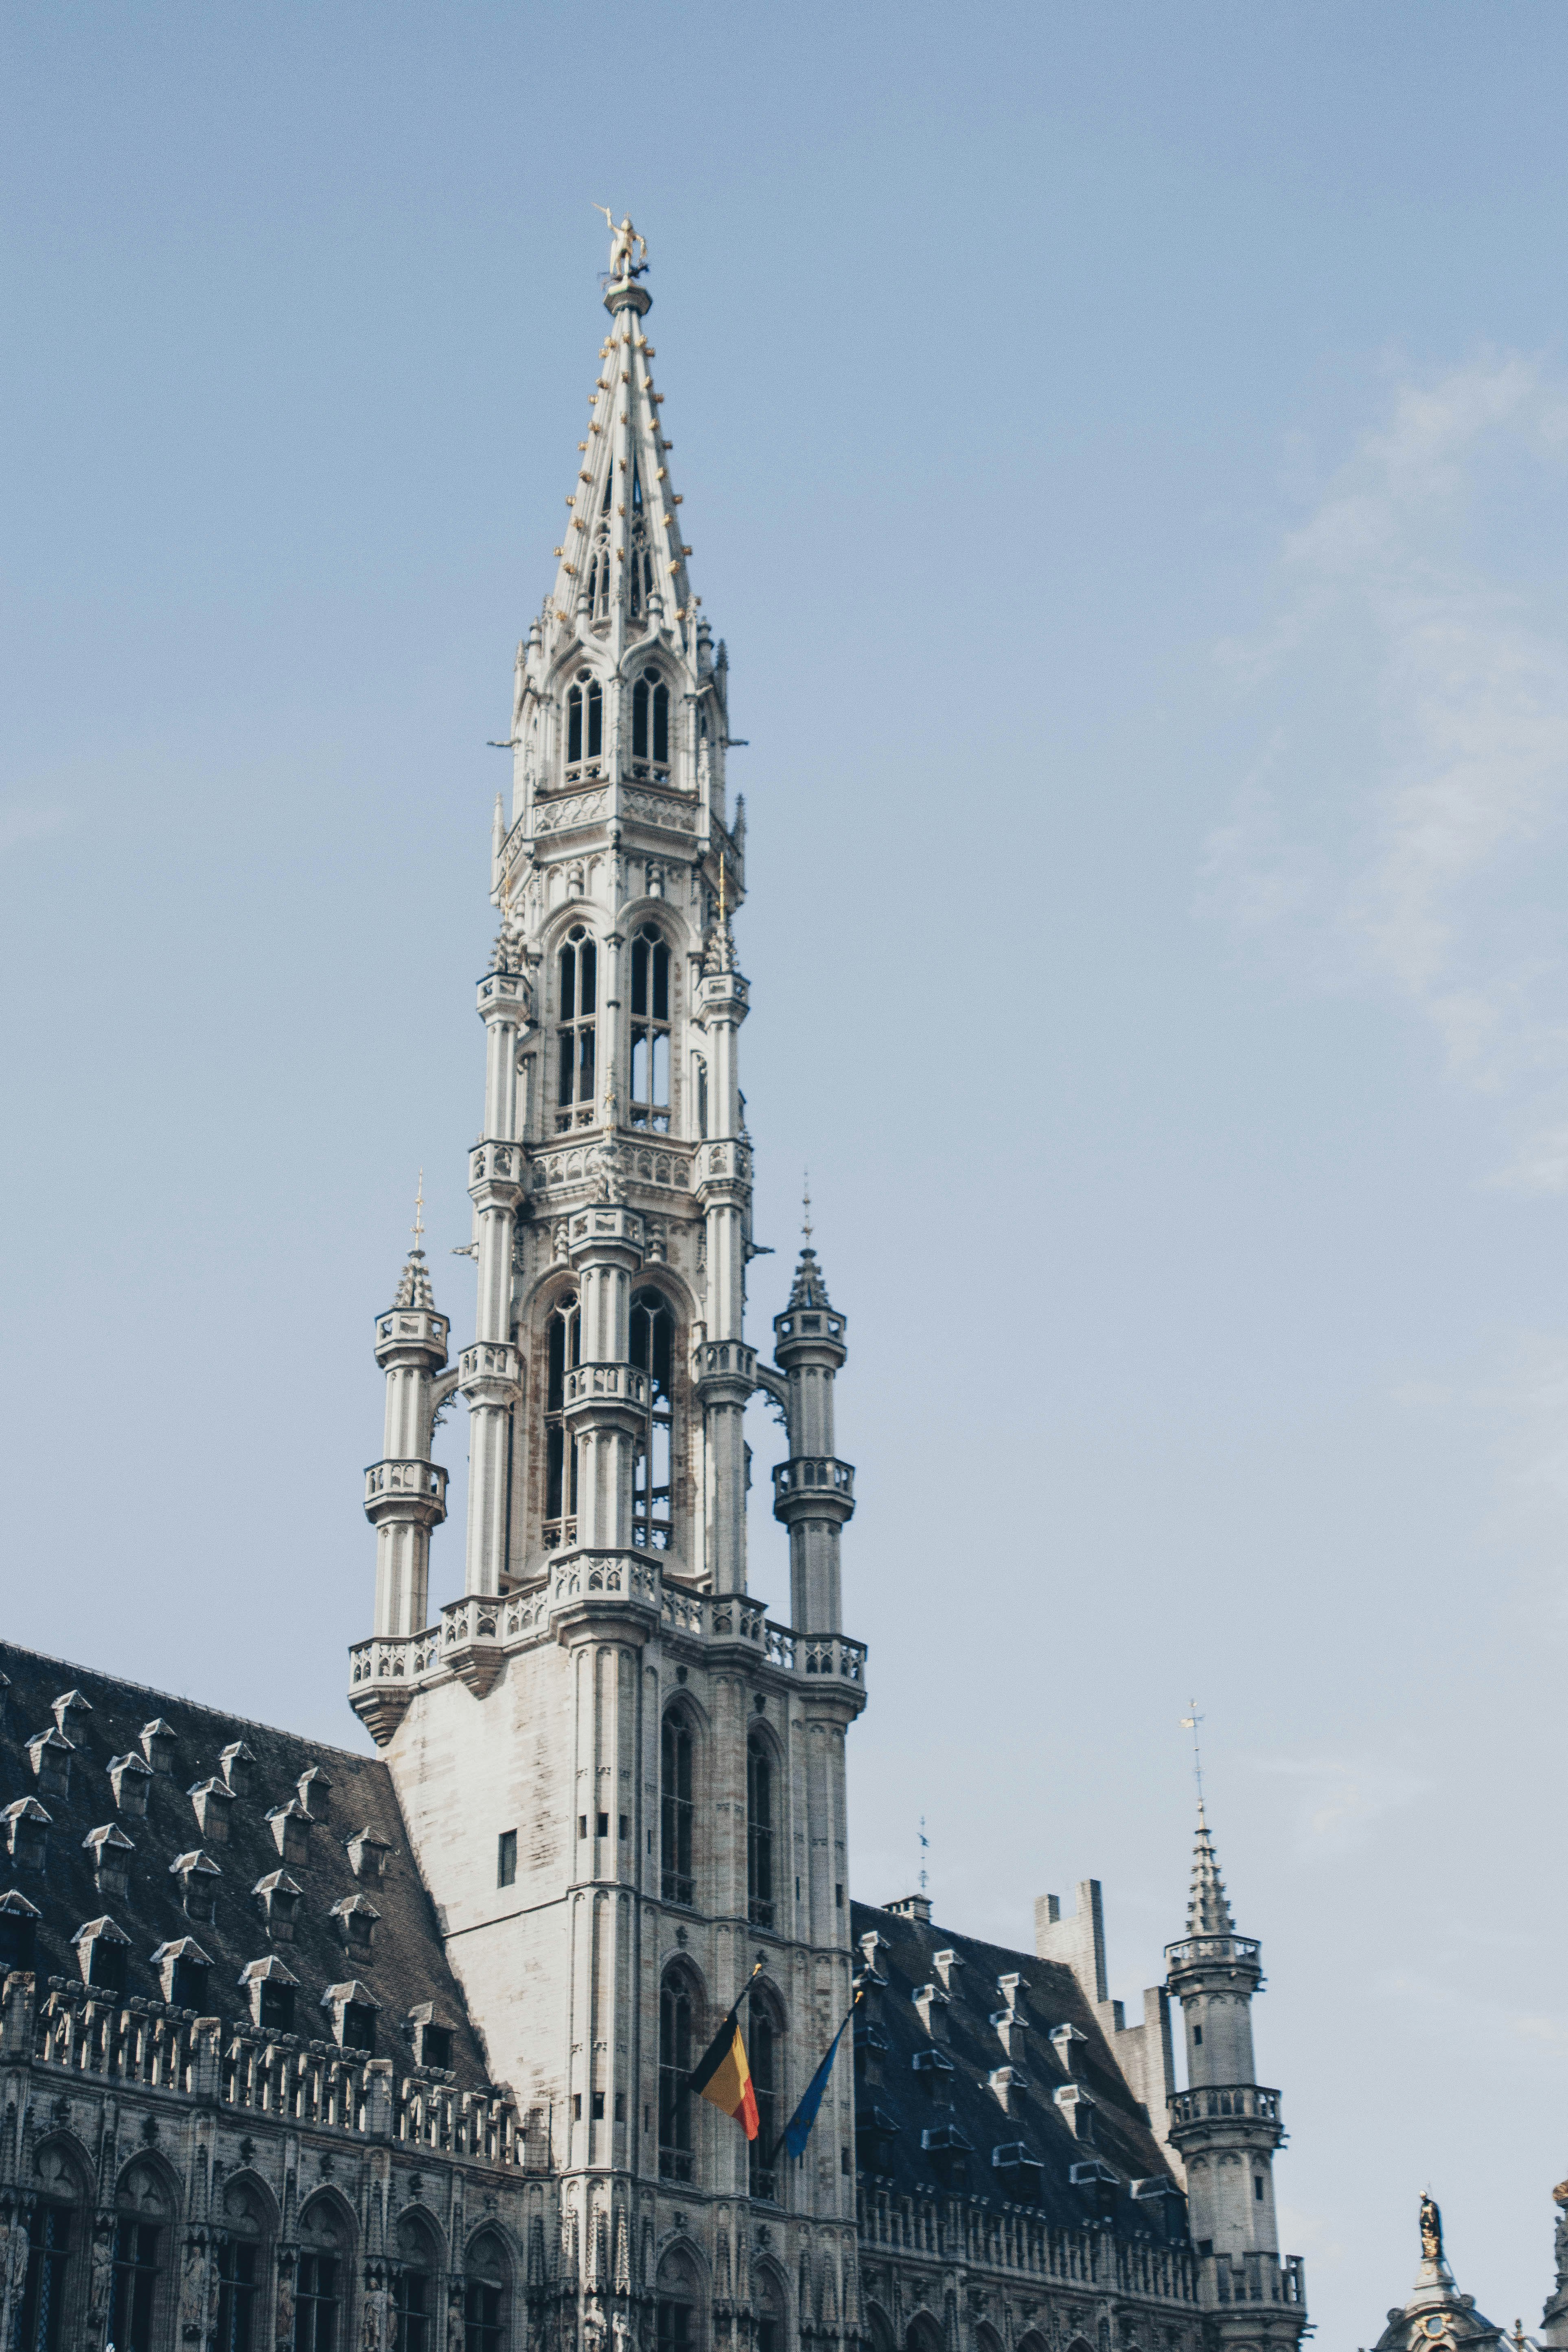 Grand Place Market in the City of Brussels, Belgium under blue and white skies during daytime